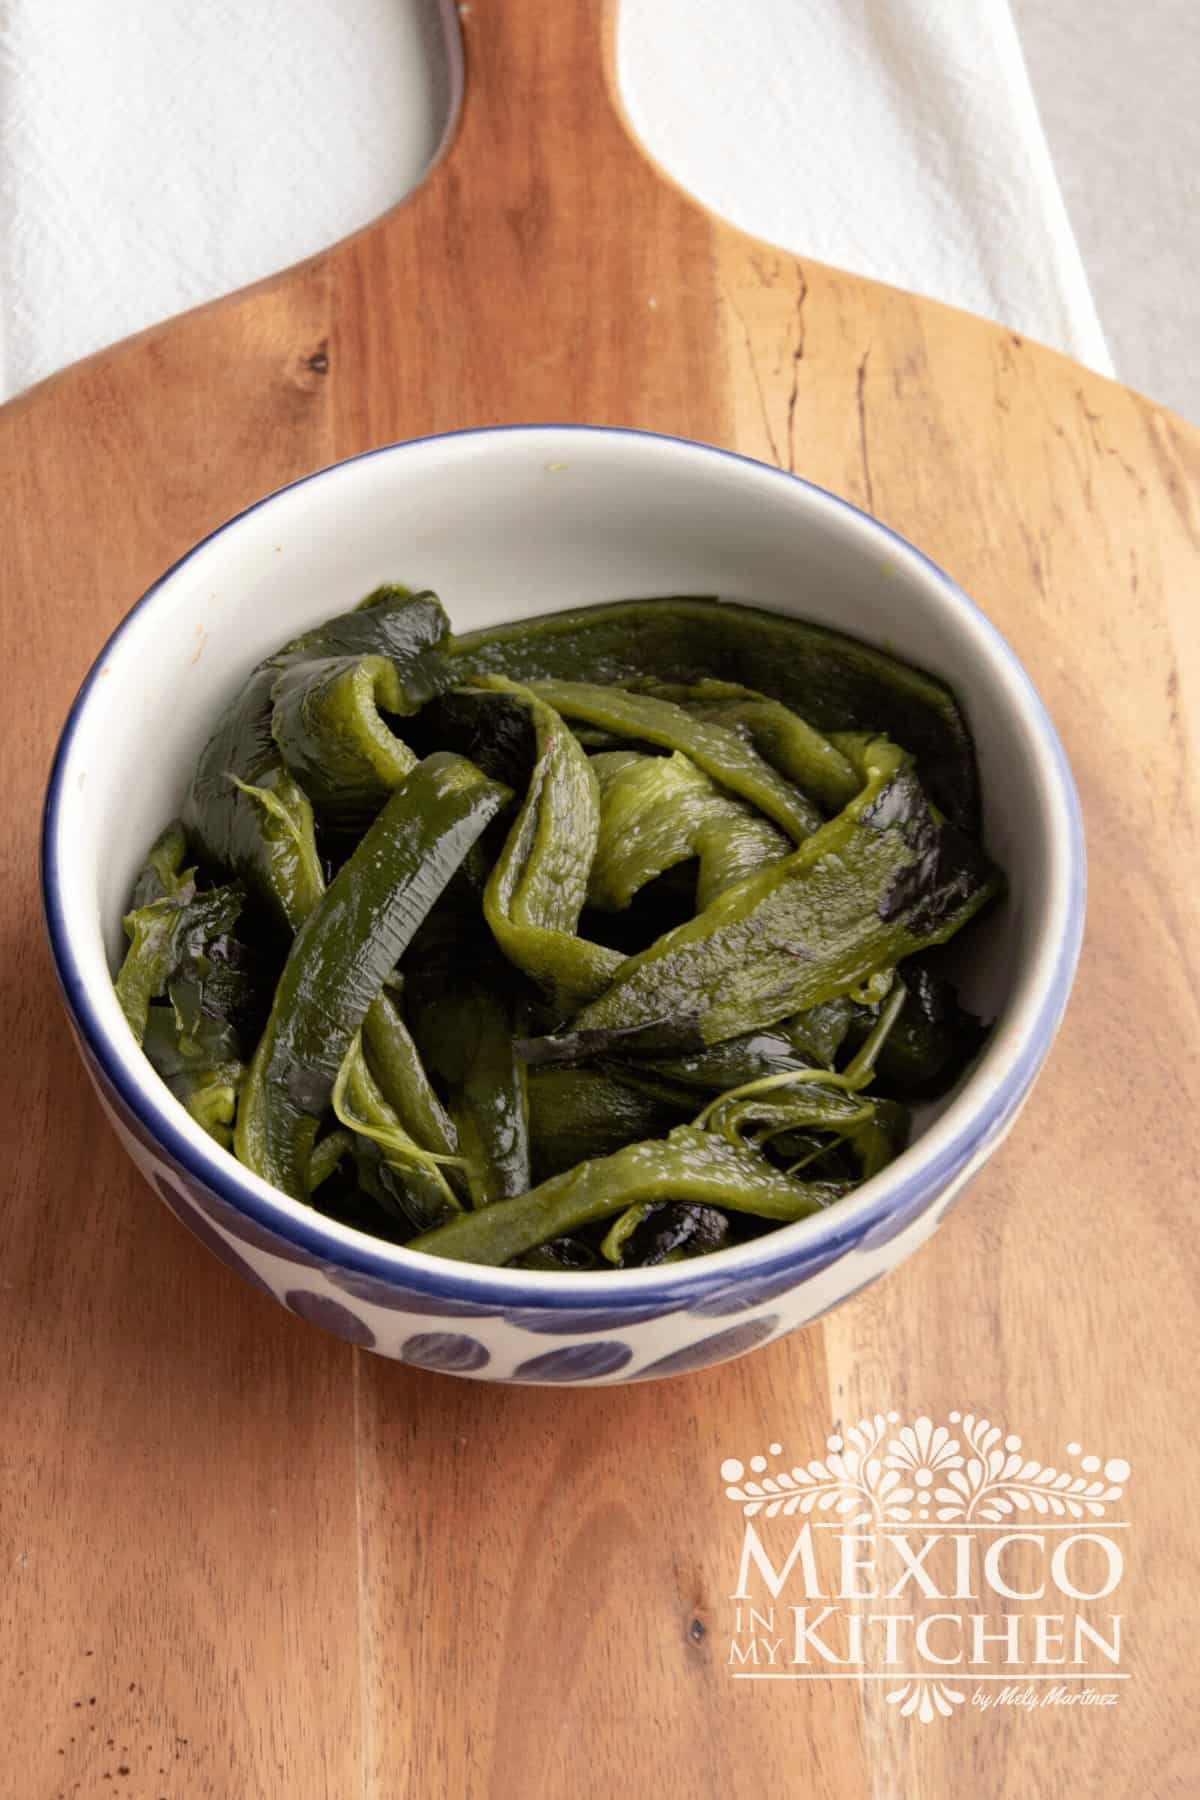 Roasted poblano peppers in a bowl.